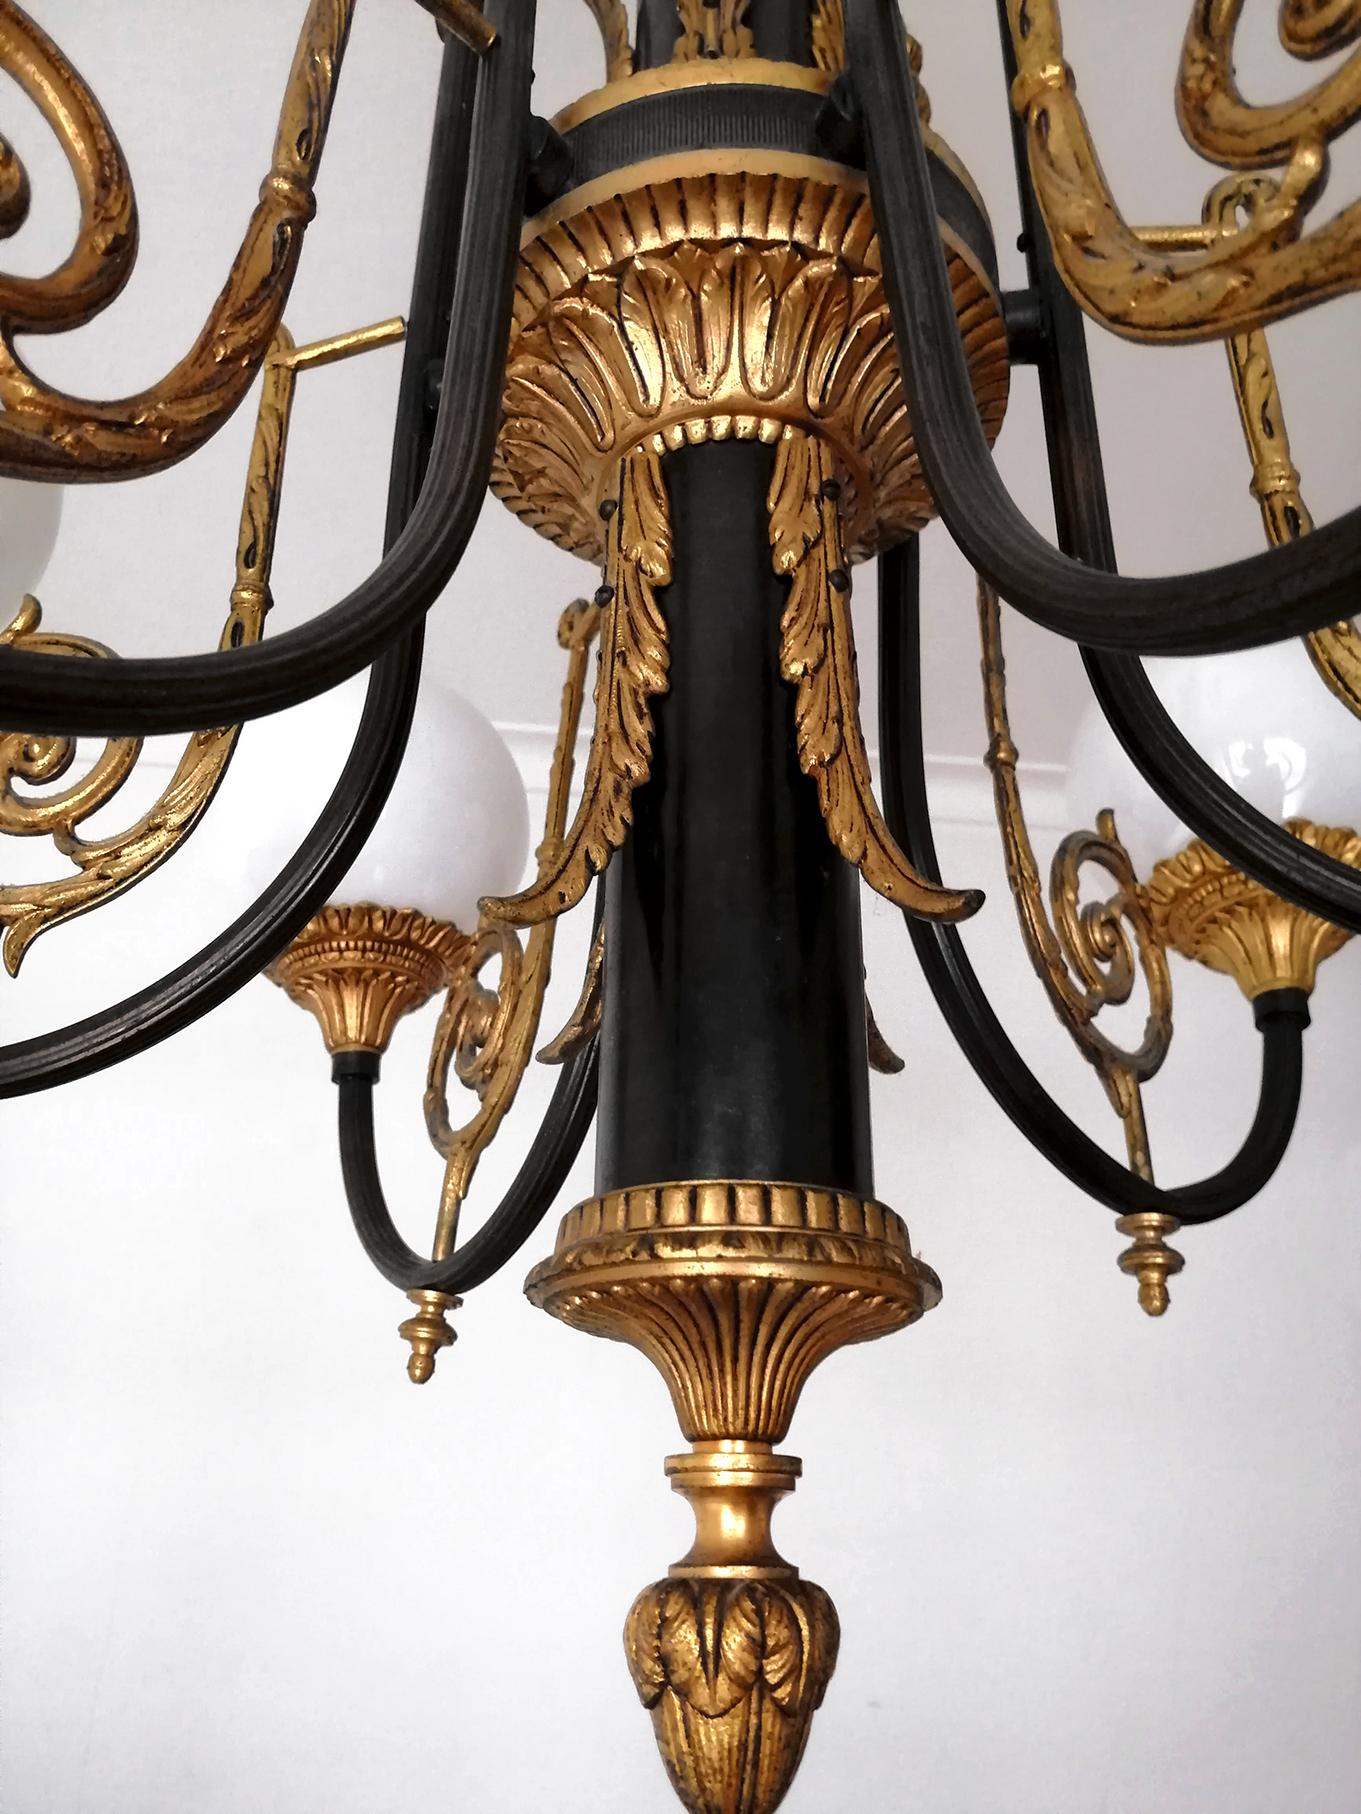 Antique French Empire Neoclassical Gilt & Patina Bronze Opaline Globe Chandelier For Sale 10